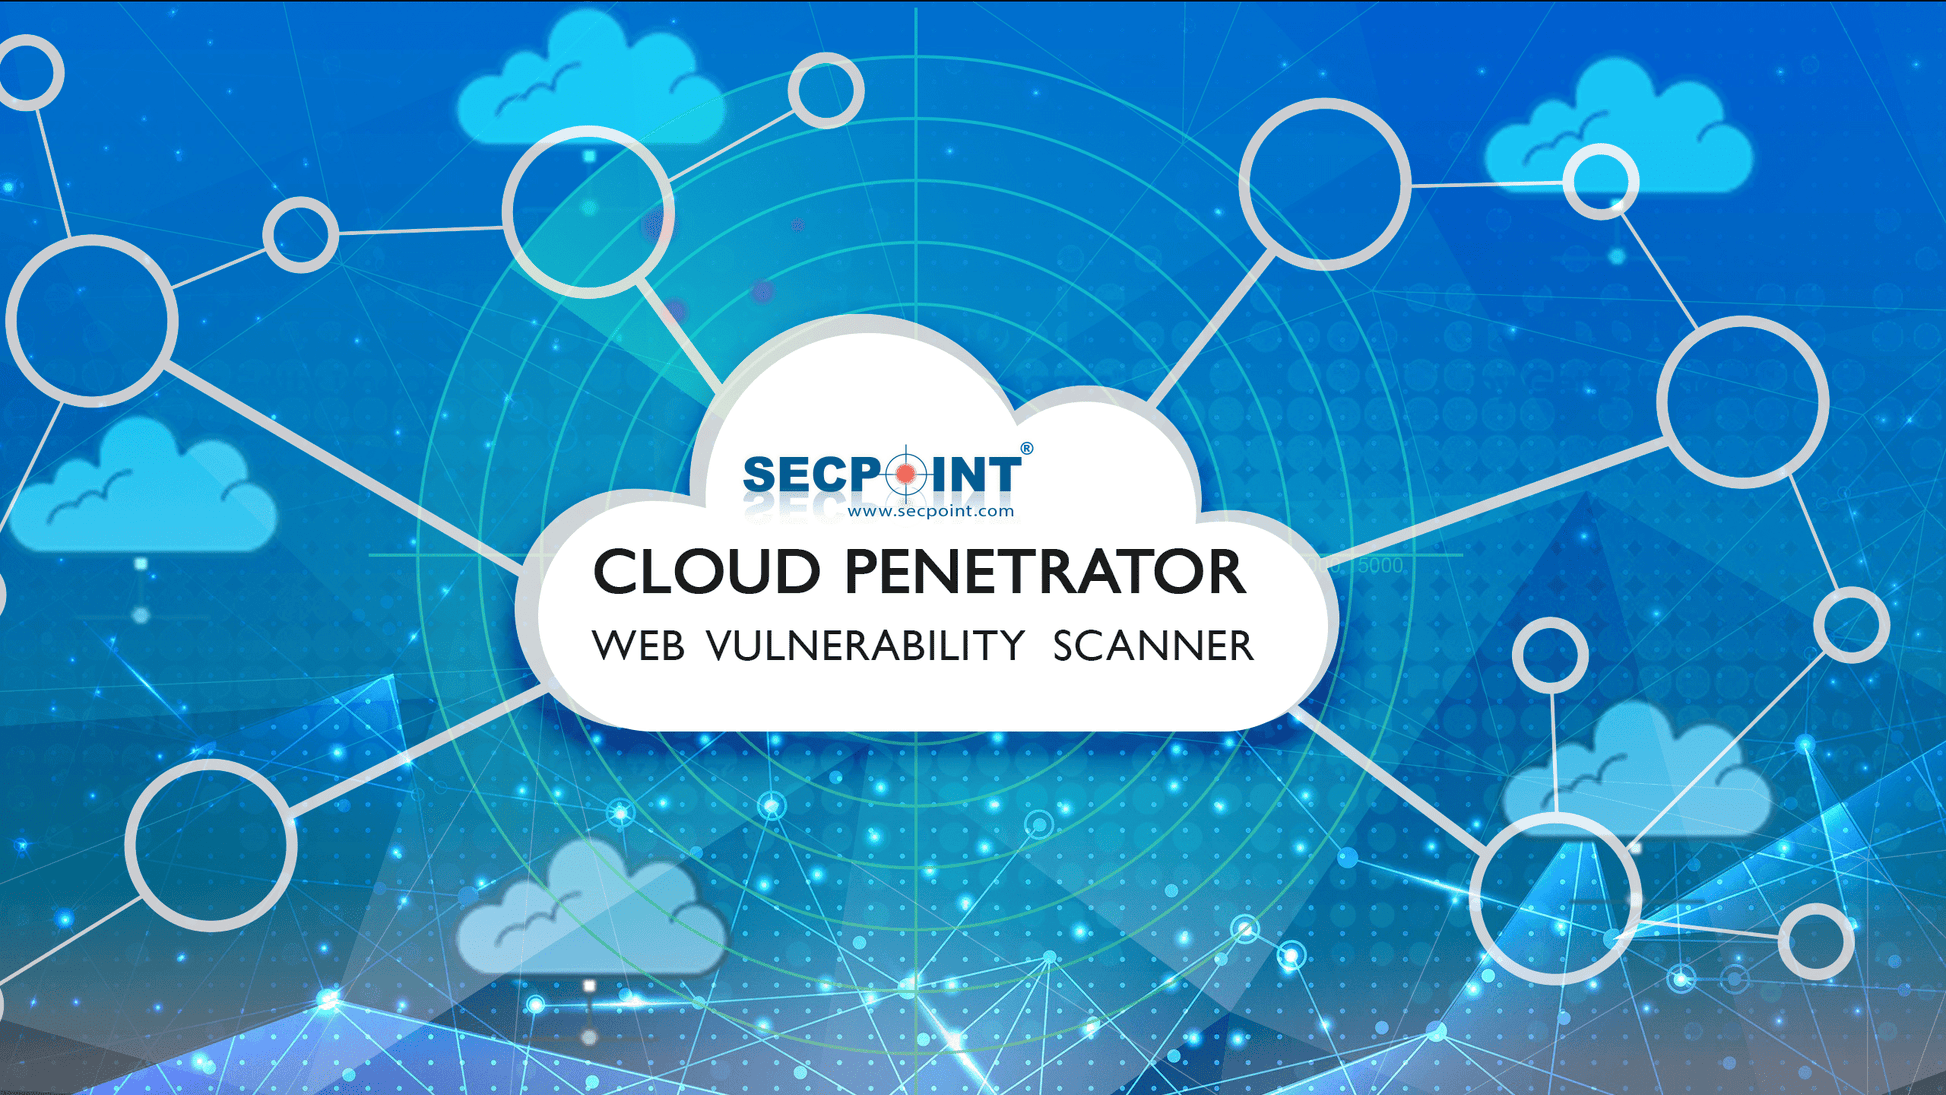 SecPoint Cloud Penetrator S9 - Vulnerability Scanning of 32 IPs for 3 Years Static Scan License - SecPoint